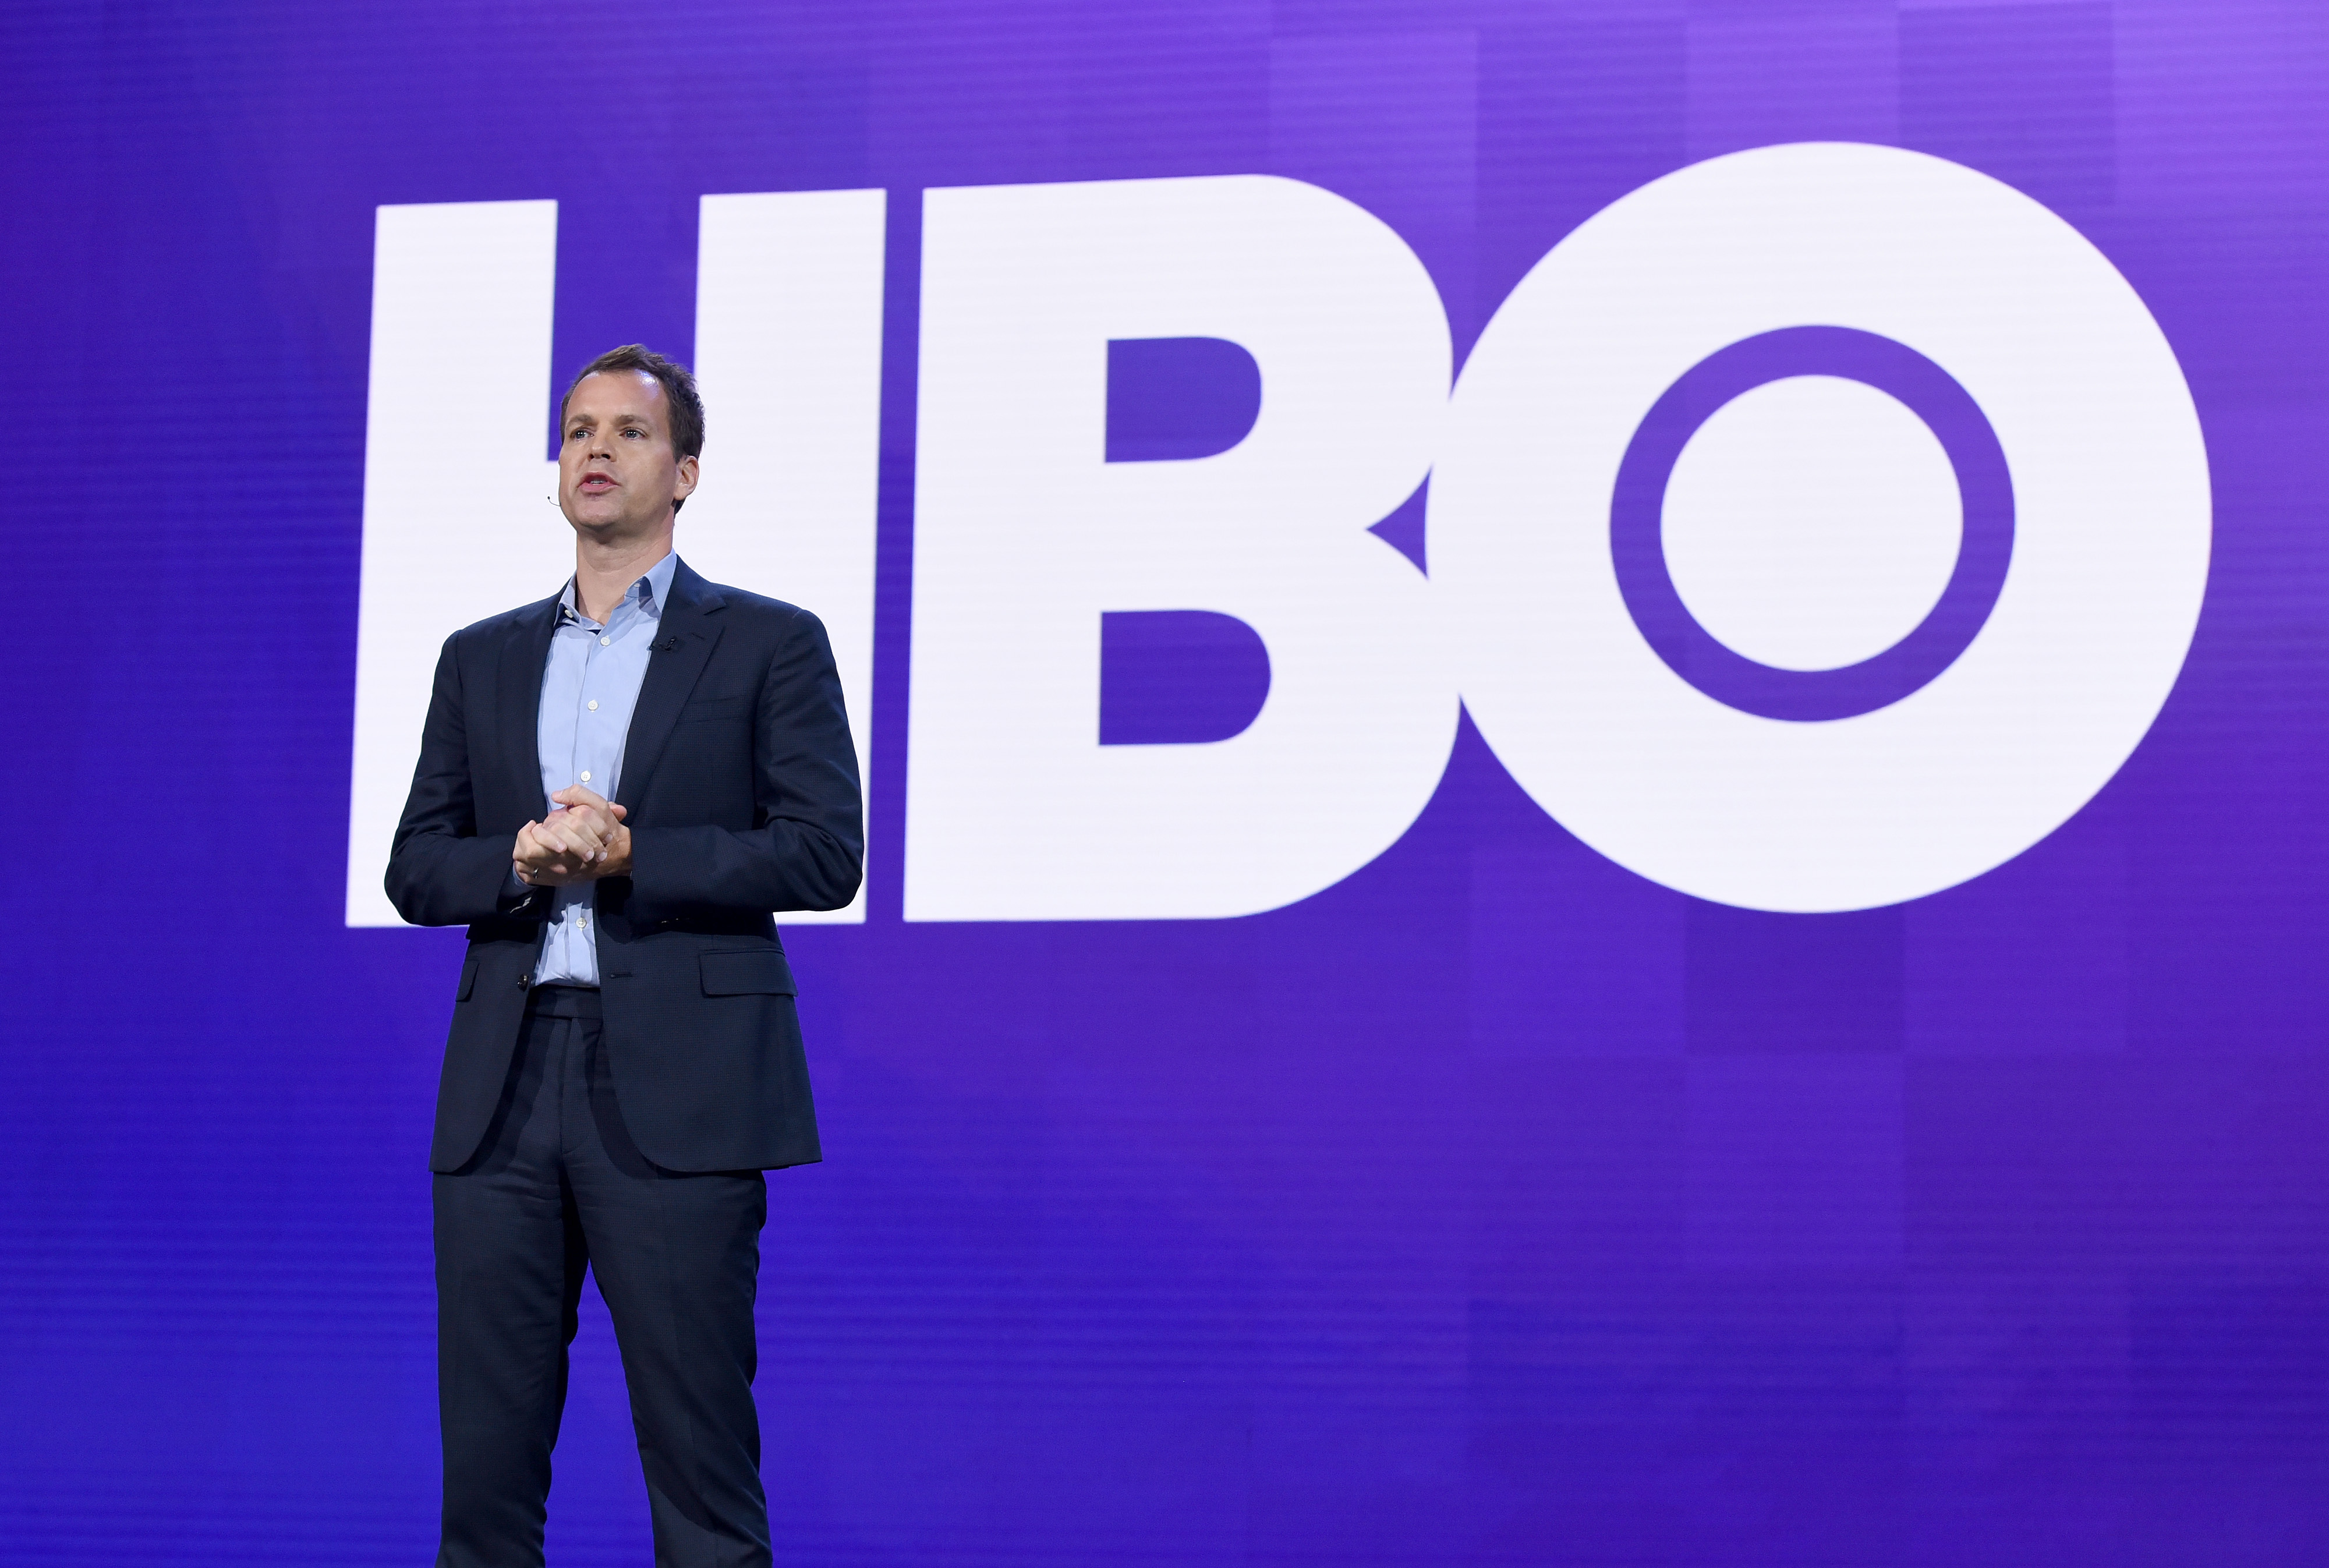 HBO Max executive, Casey Bloys discusses the streaming platform in 2019 